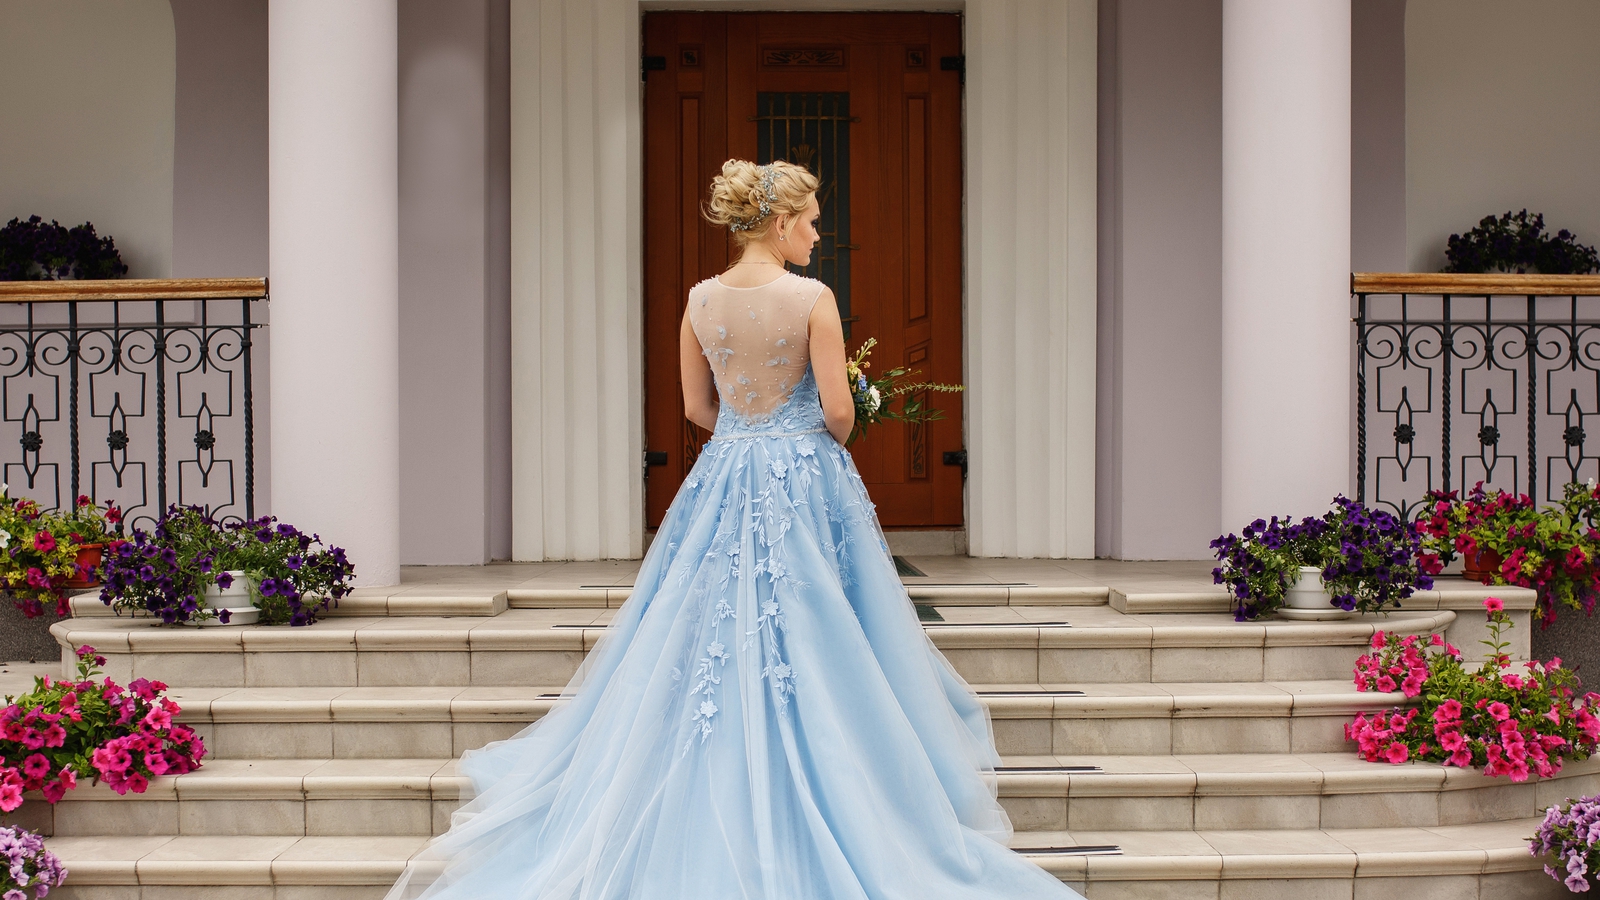 Lush Cascading Tulle Dress in American-style. Sky Blue Tulle Dress